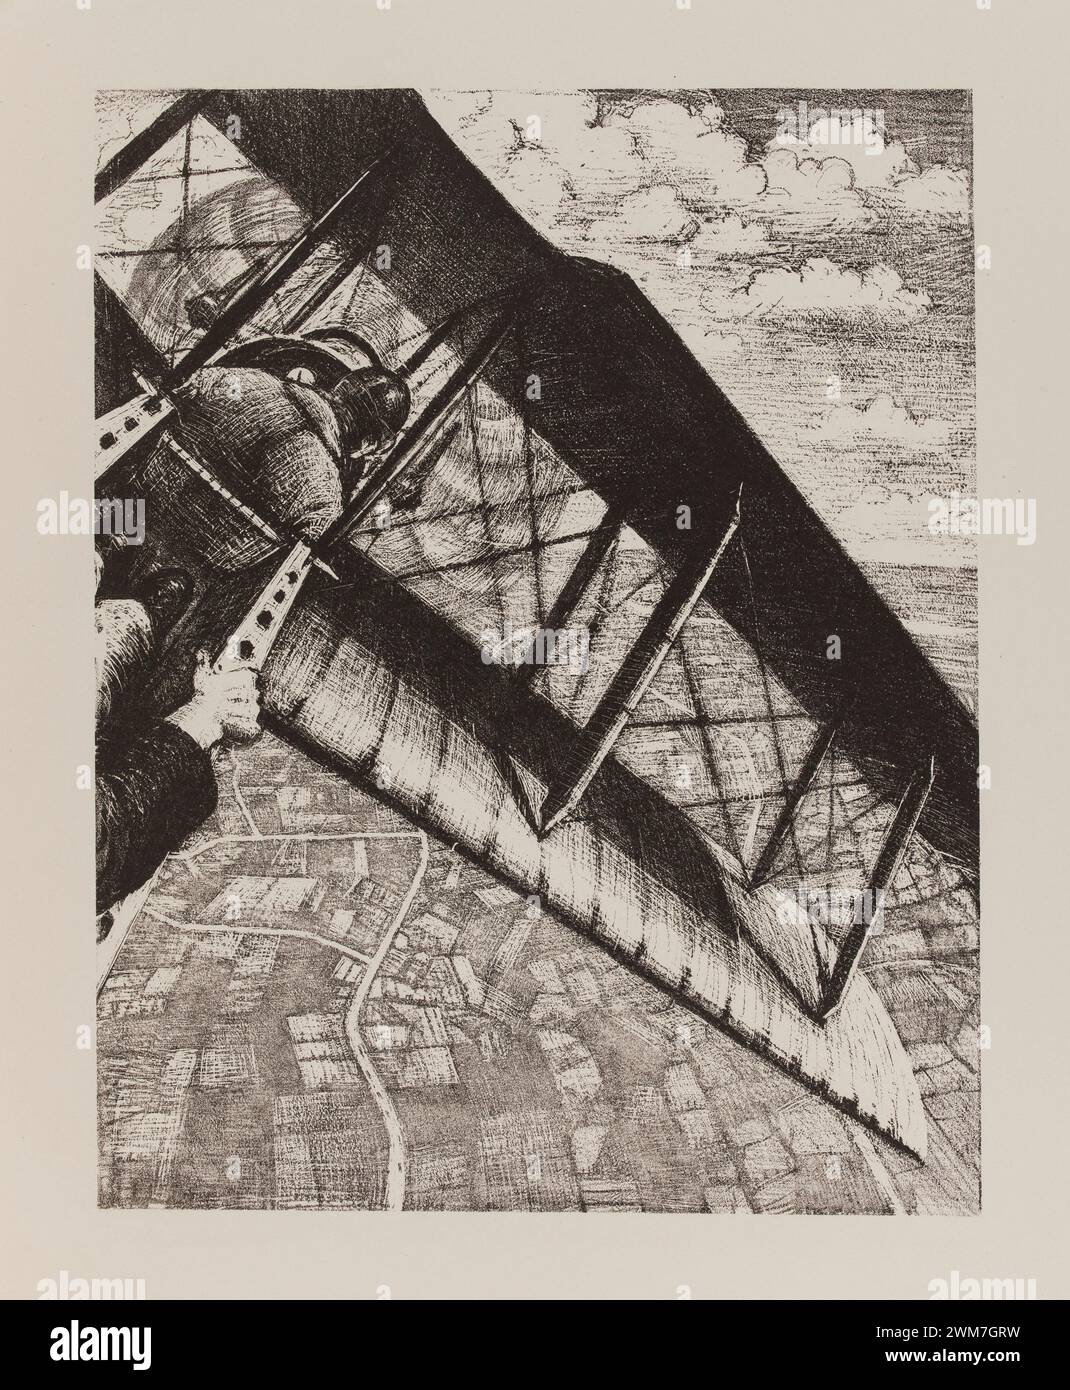 One mile above ground, from The Great War: Britain's Efforts and Ideals: Making Aircraft.  Print lithograph by C.R.W. (Christopher Richard Wynne) Nevinson., 1916 Stock Photo